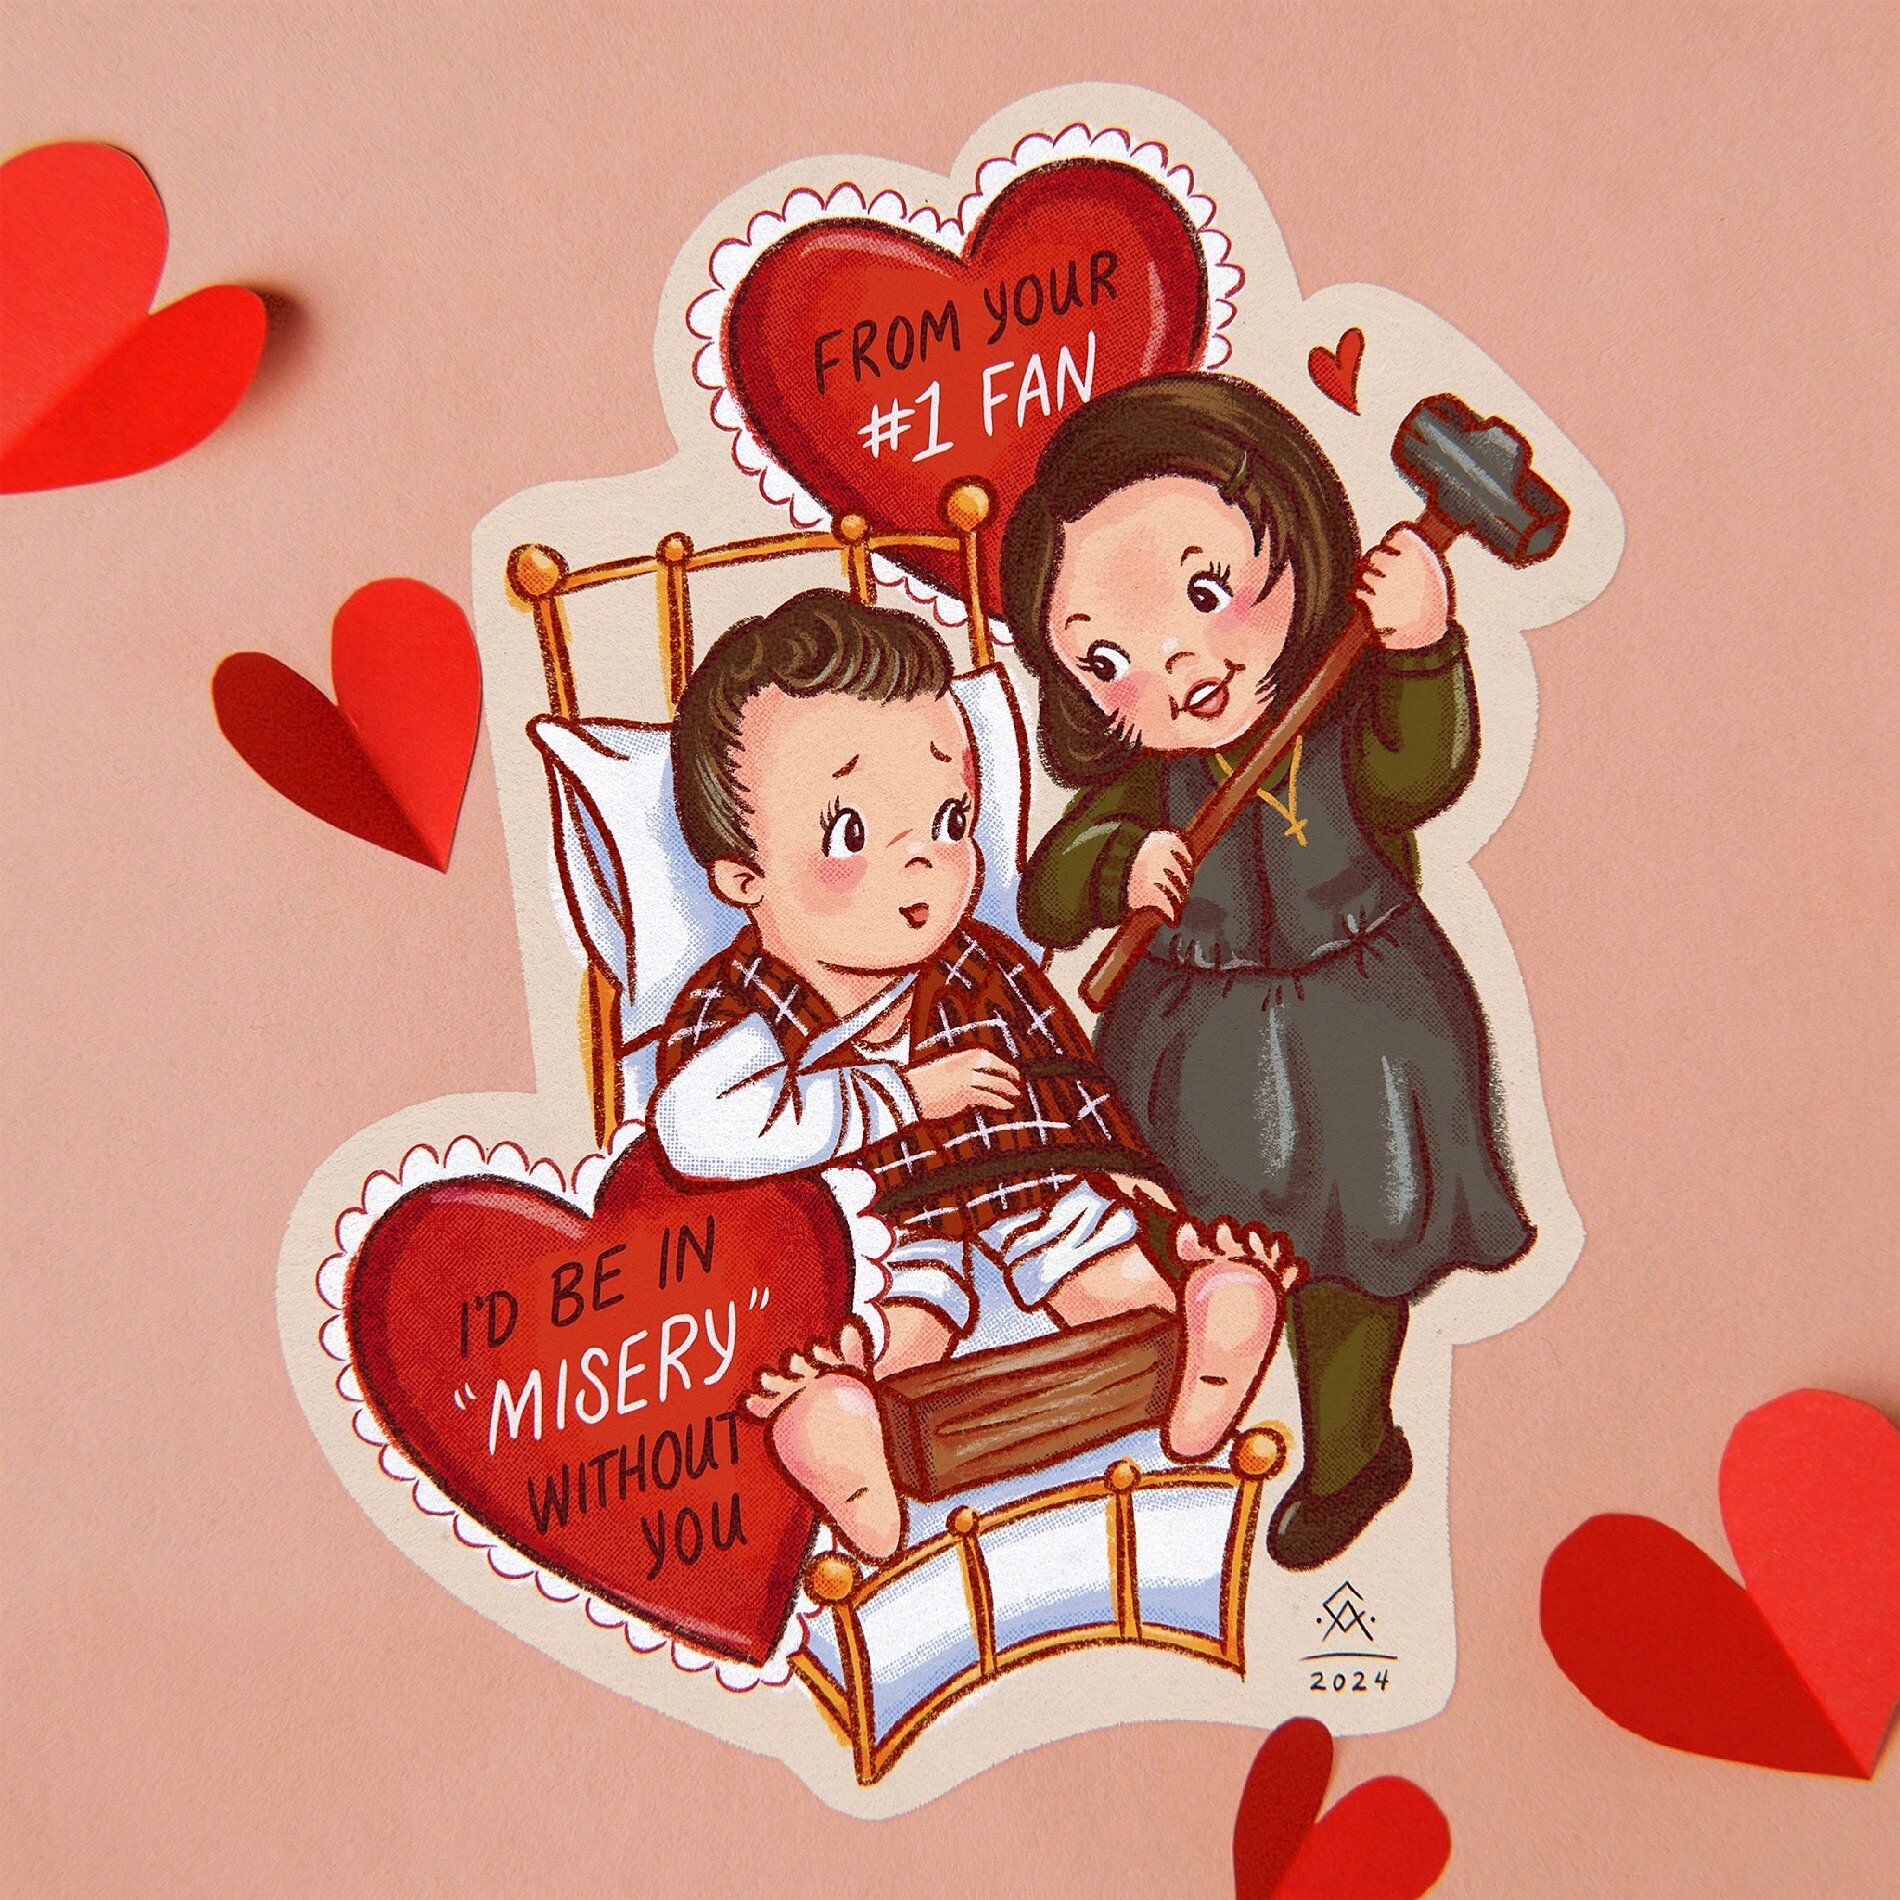 Year 4 of making a horror Valentine for @jawsmartin! 🦶🏻🔨🖤 A cute little Annie Wilkes &amp; Paul Sheldon from Stephen King&rsquo;s Misery. Forever crazy obsessed with my man. Not saying I&rsquo;d stalk him &amp; drag his body out of a crashed vehi